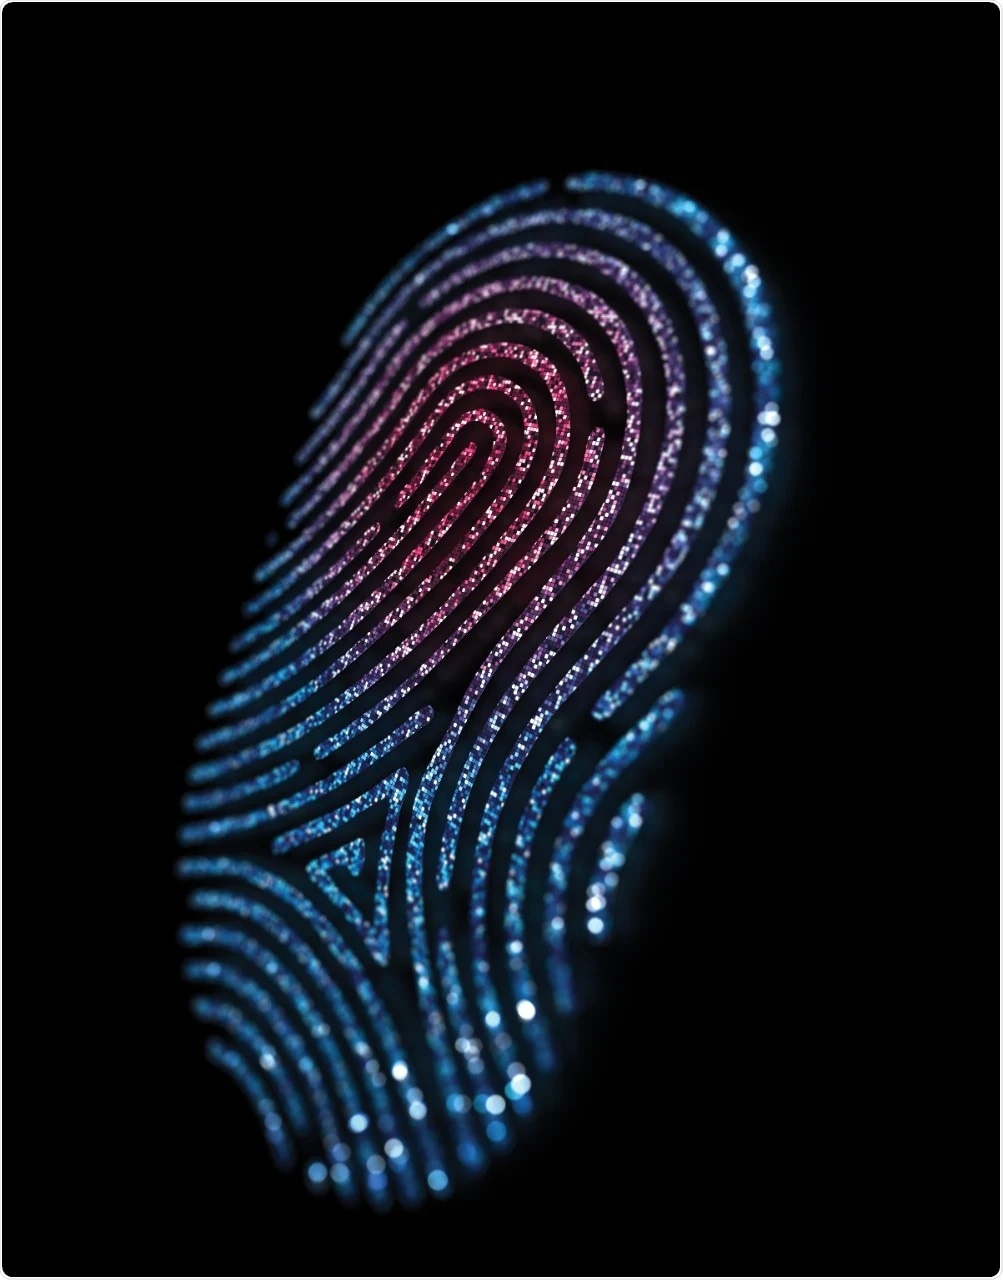 Each person has their own unique “fingerprint” of protein activity, says study